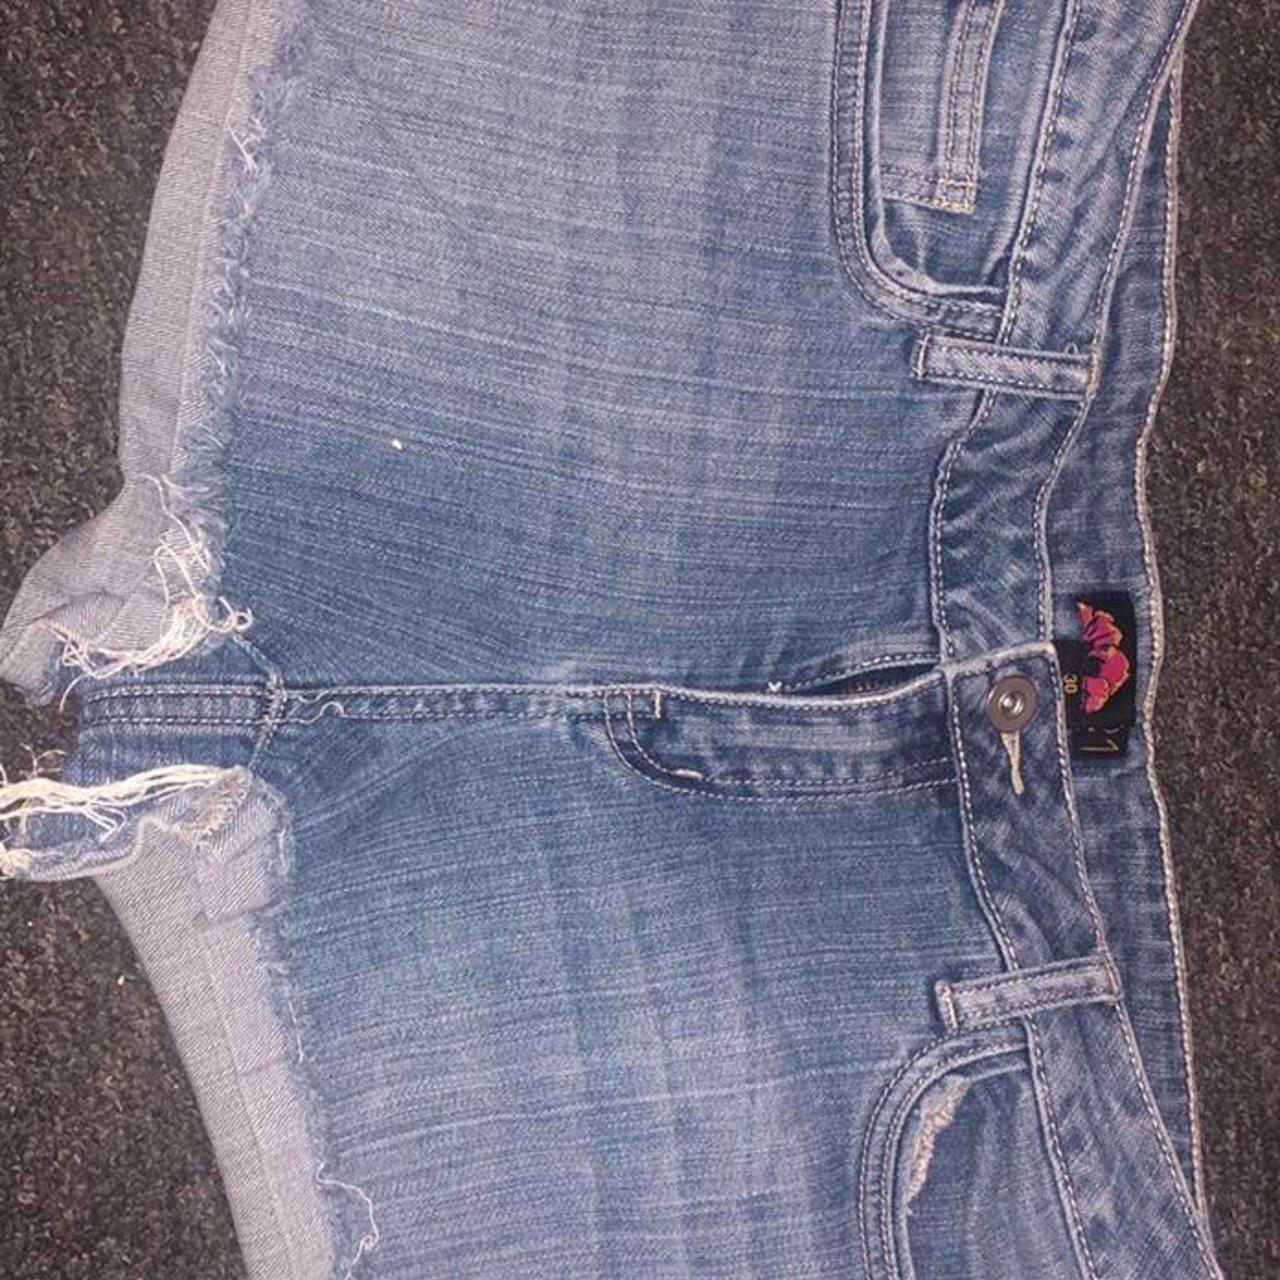 Product Image 1 - Jean shorts
Great Condition, only worn